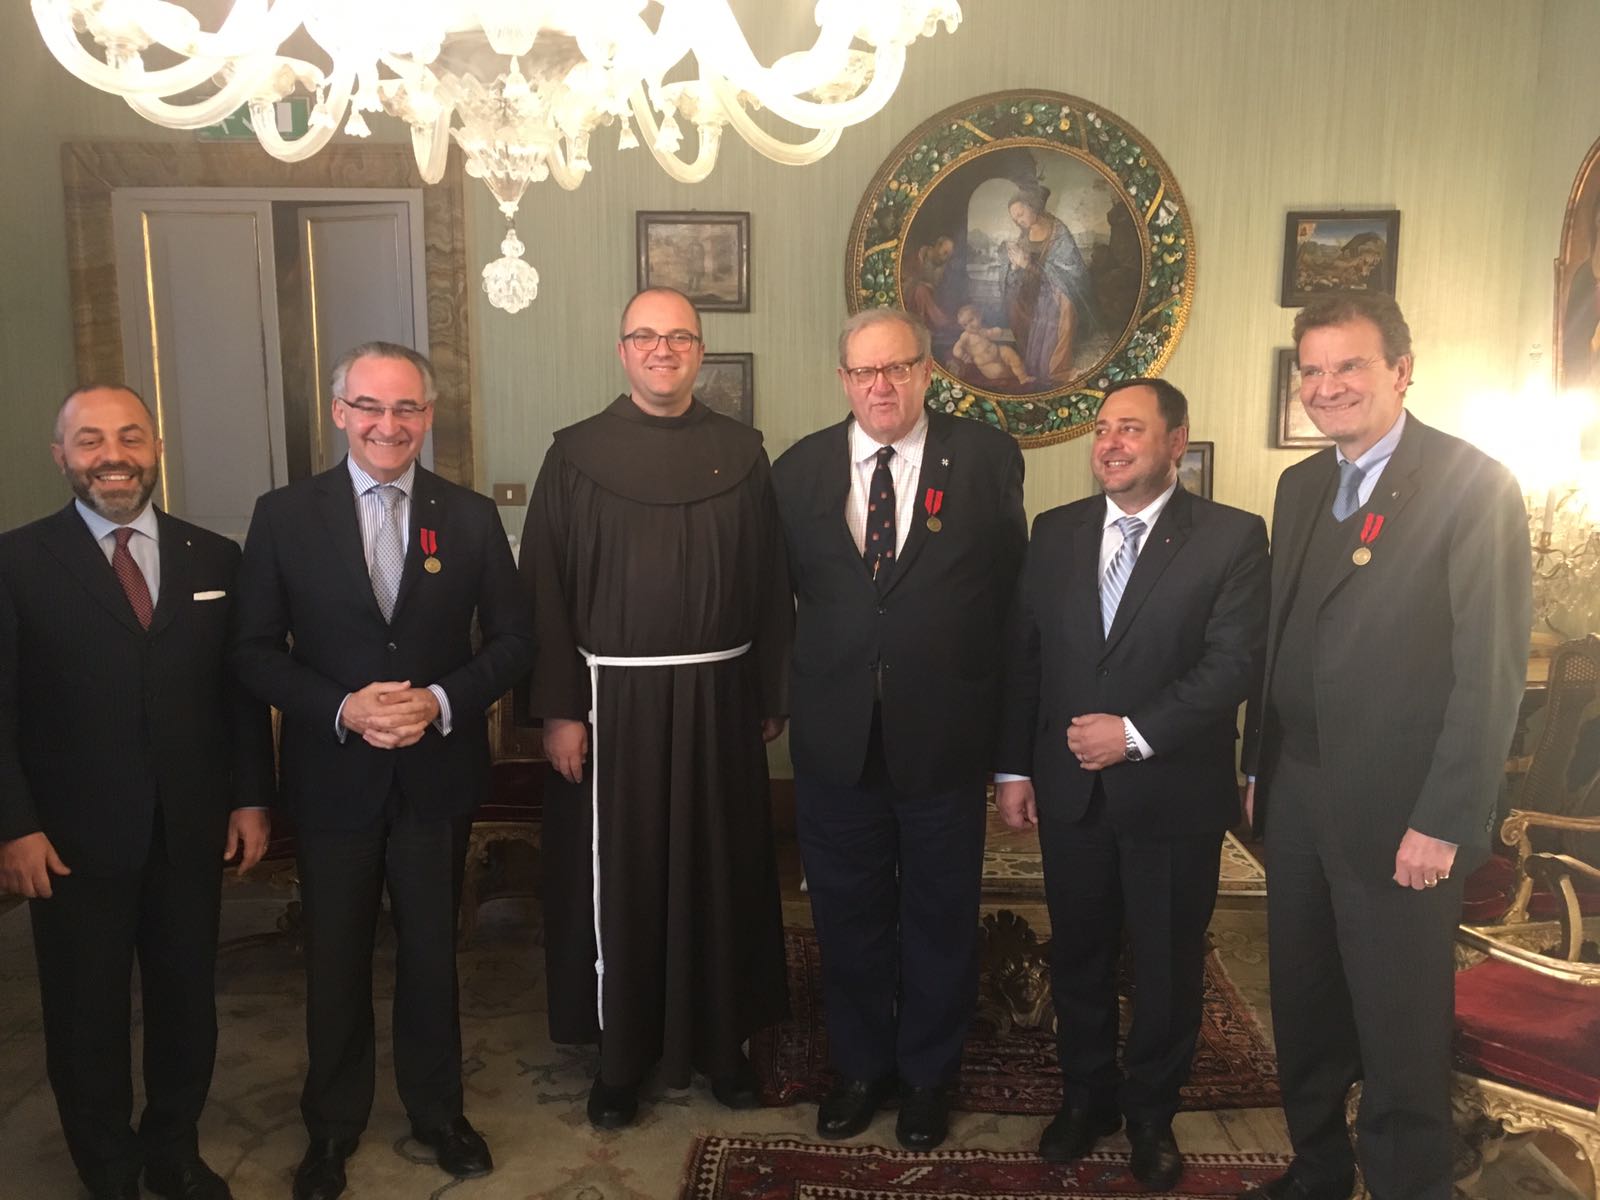 Commemorative honours on the occasion of the 25th anniversary of of the Albanian Organisation of the Order of Malta